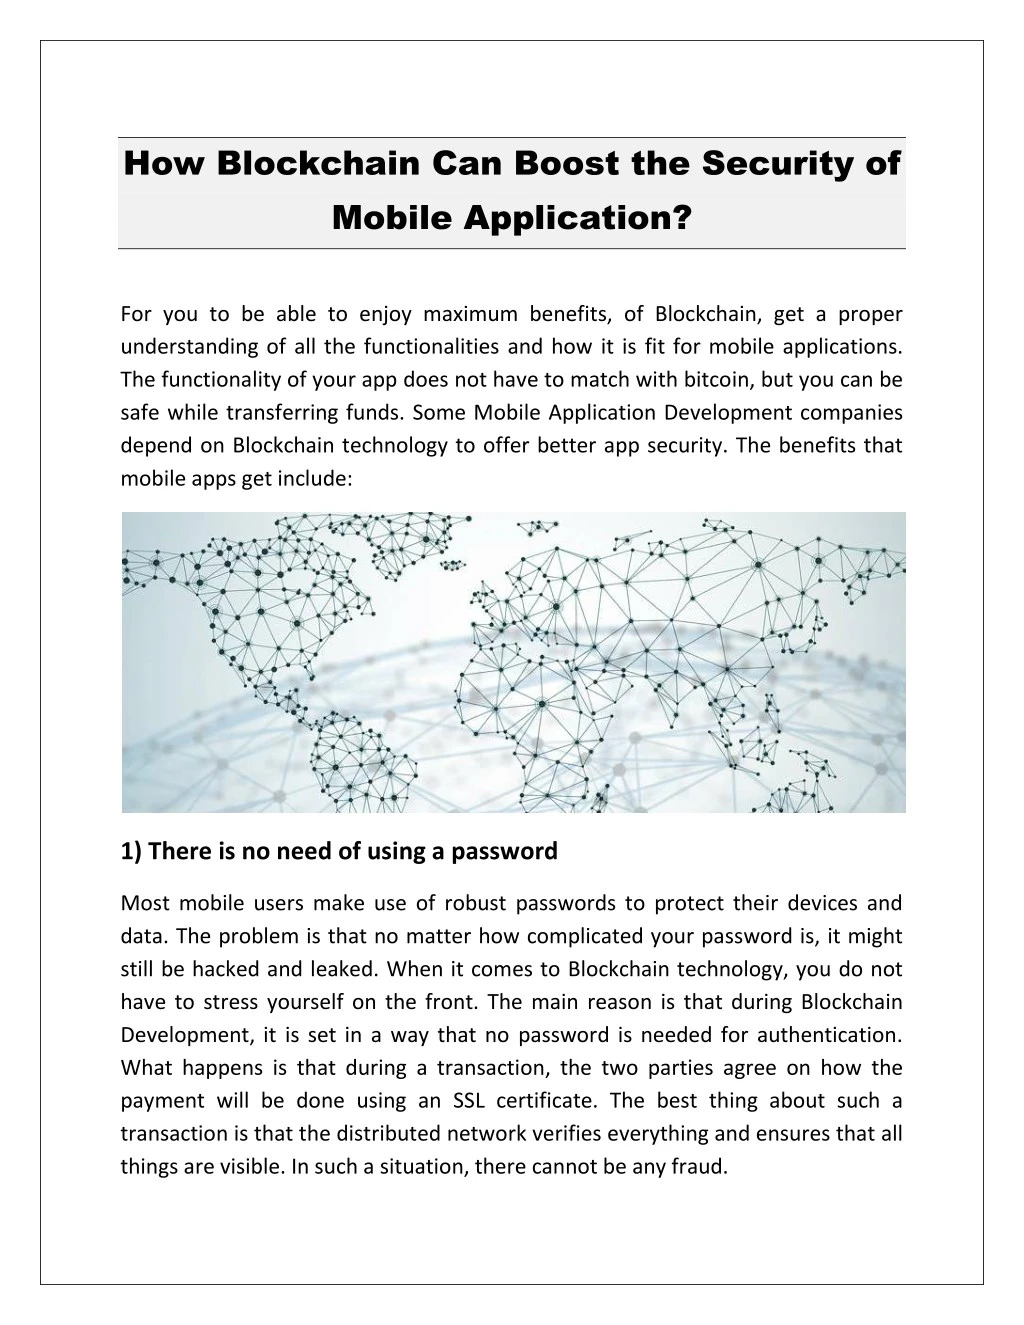 how blockchain can boost the security of mobile